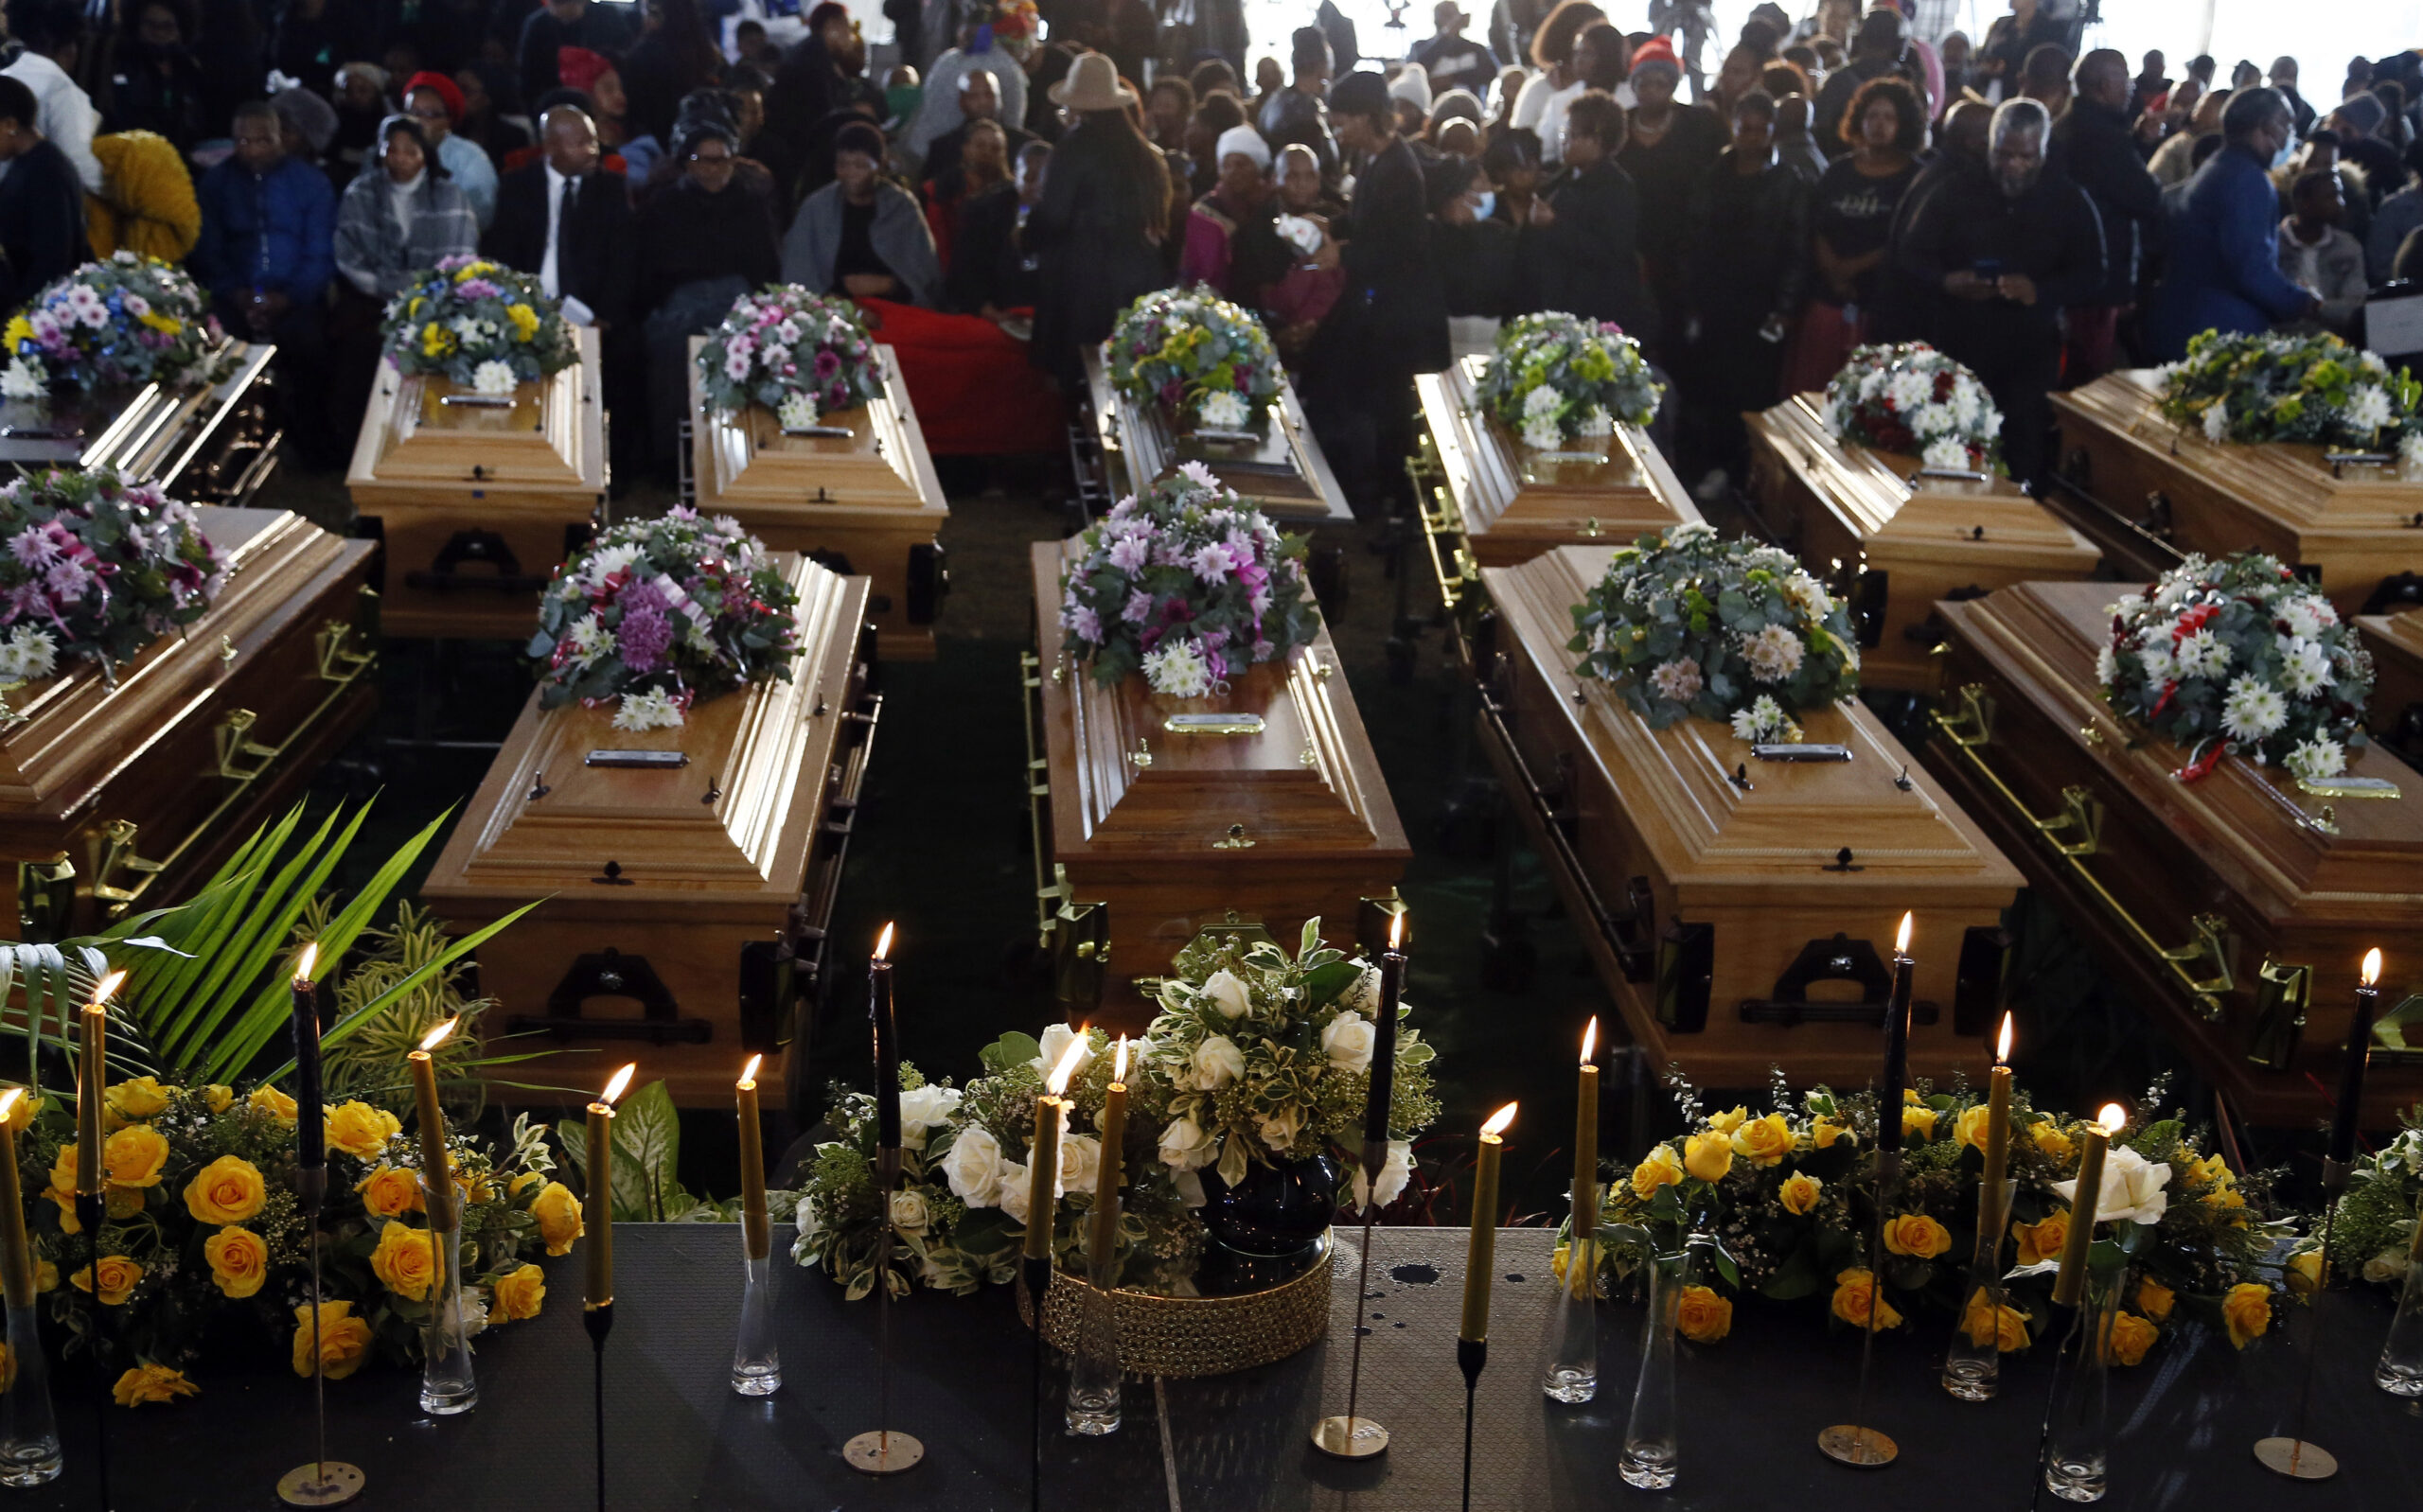 “Sentencing for South African Bar Owners in Teenage Deaths Case”